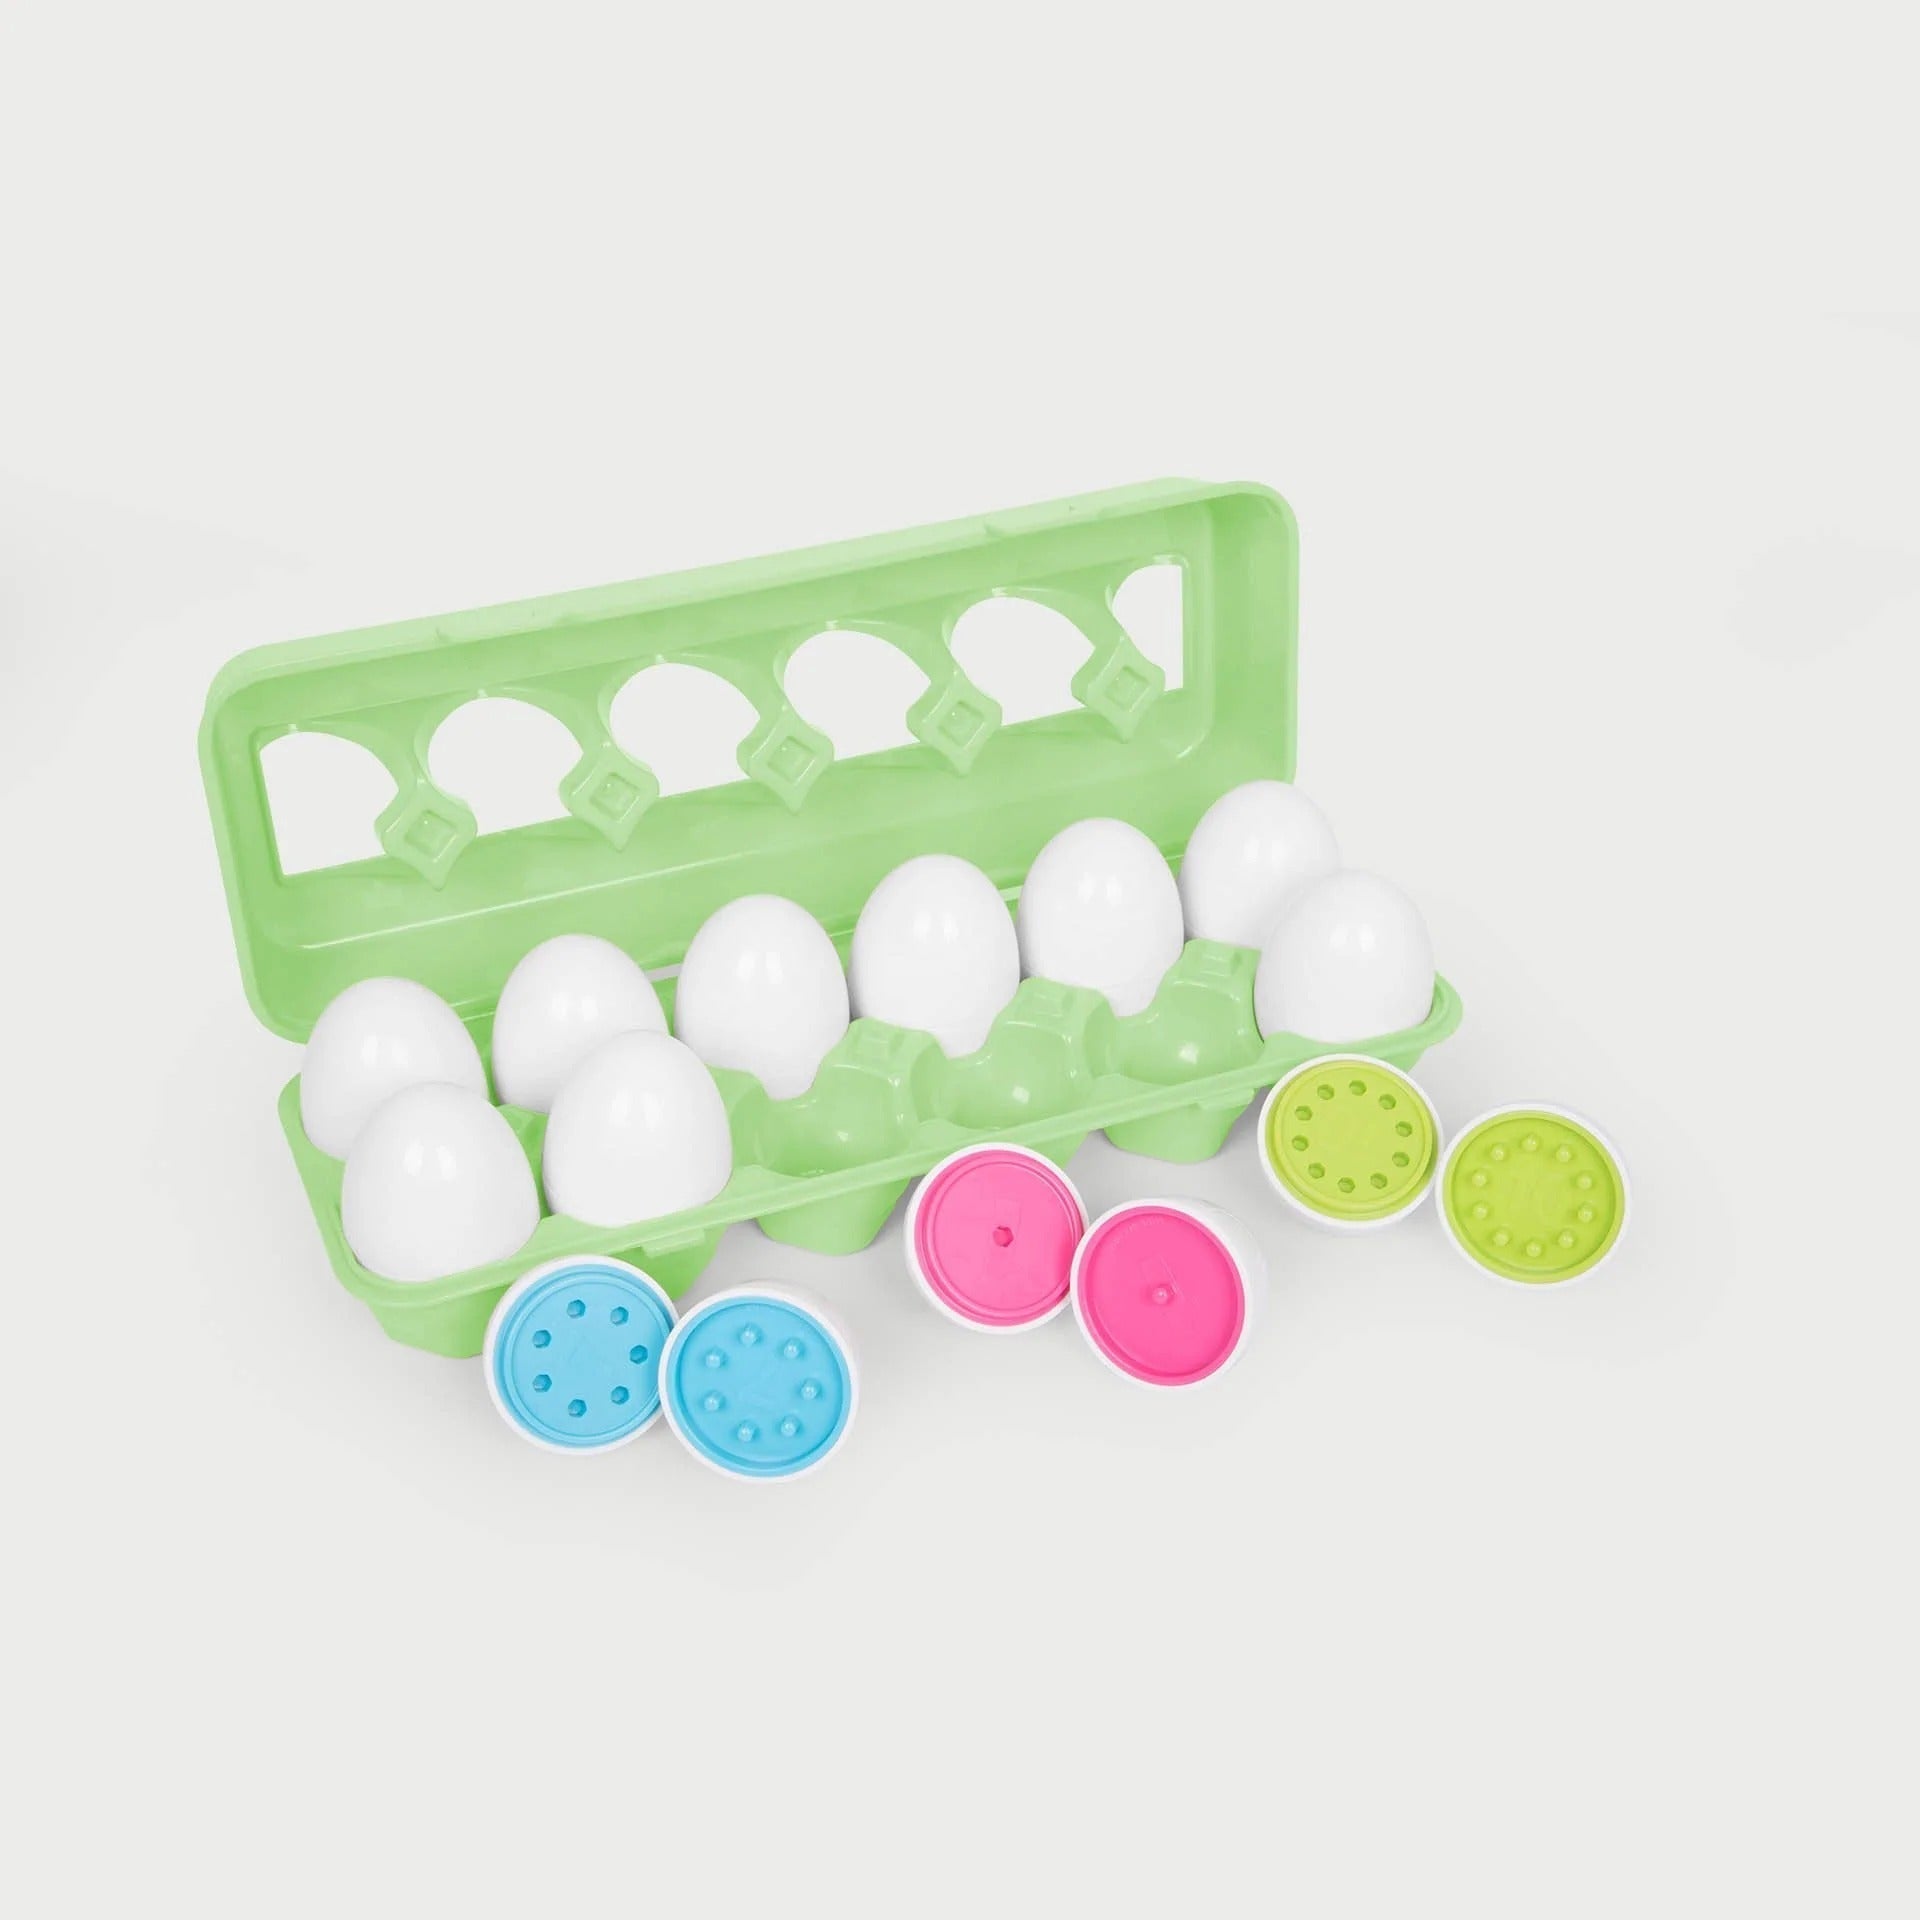 Colour Match Eggs, Unveil the Joy of Learning with TickiT Colour Match Eggs!Introduce your child to a world of numbers, colours, and fine motor skill development with TickiT's Colour Match Eggs set. This educational toy is thoughtfully designed to foster independent learning while offering a variety of ways to play and learn. Colour Match Eggs Features: Egg-citing Learning Open each egg to reveal brightly coloured numbers that correspond with matching pegs and holes. It's an ideal way to teach counting, num